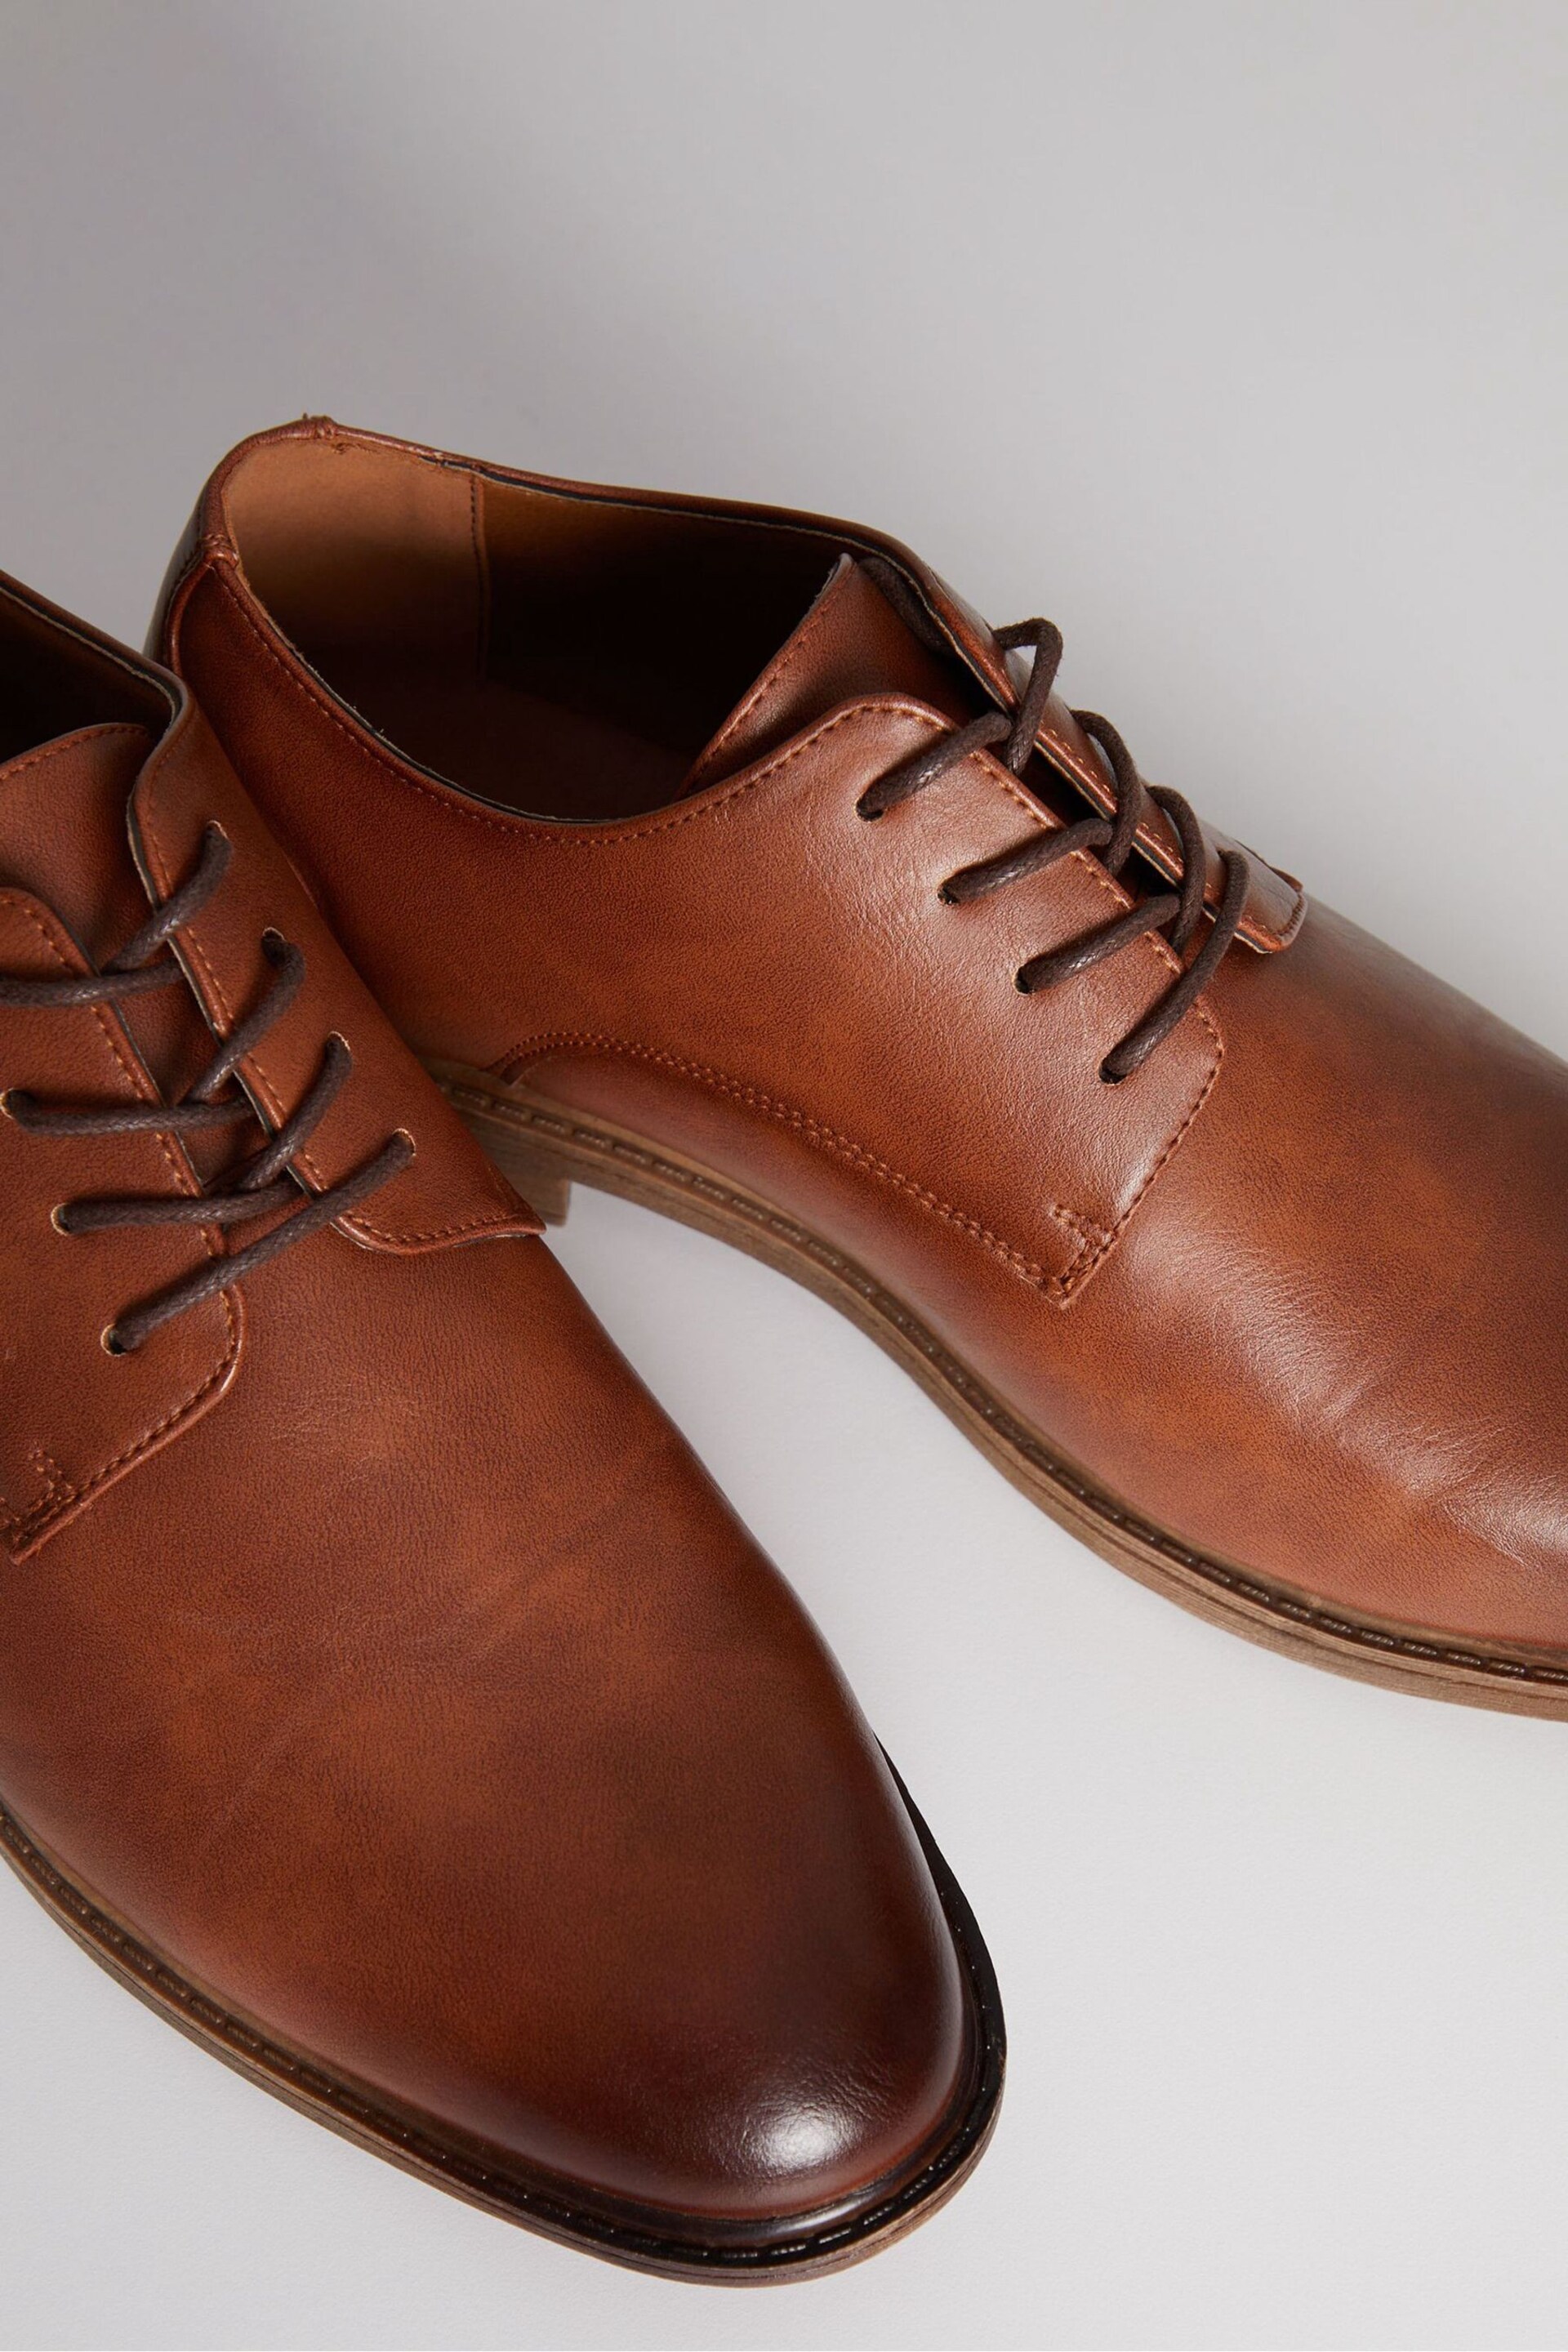 Threadbare Brown Smart Derby Shoes - Image 3 of 4